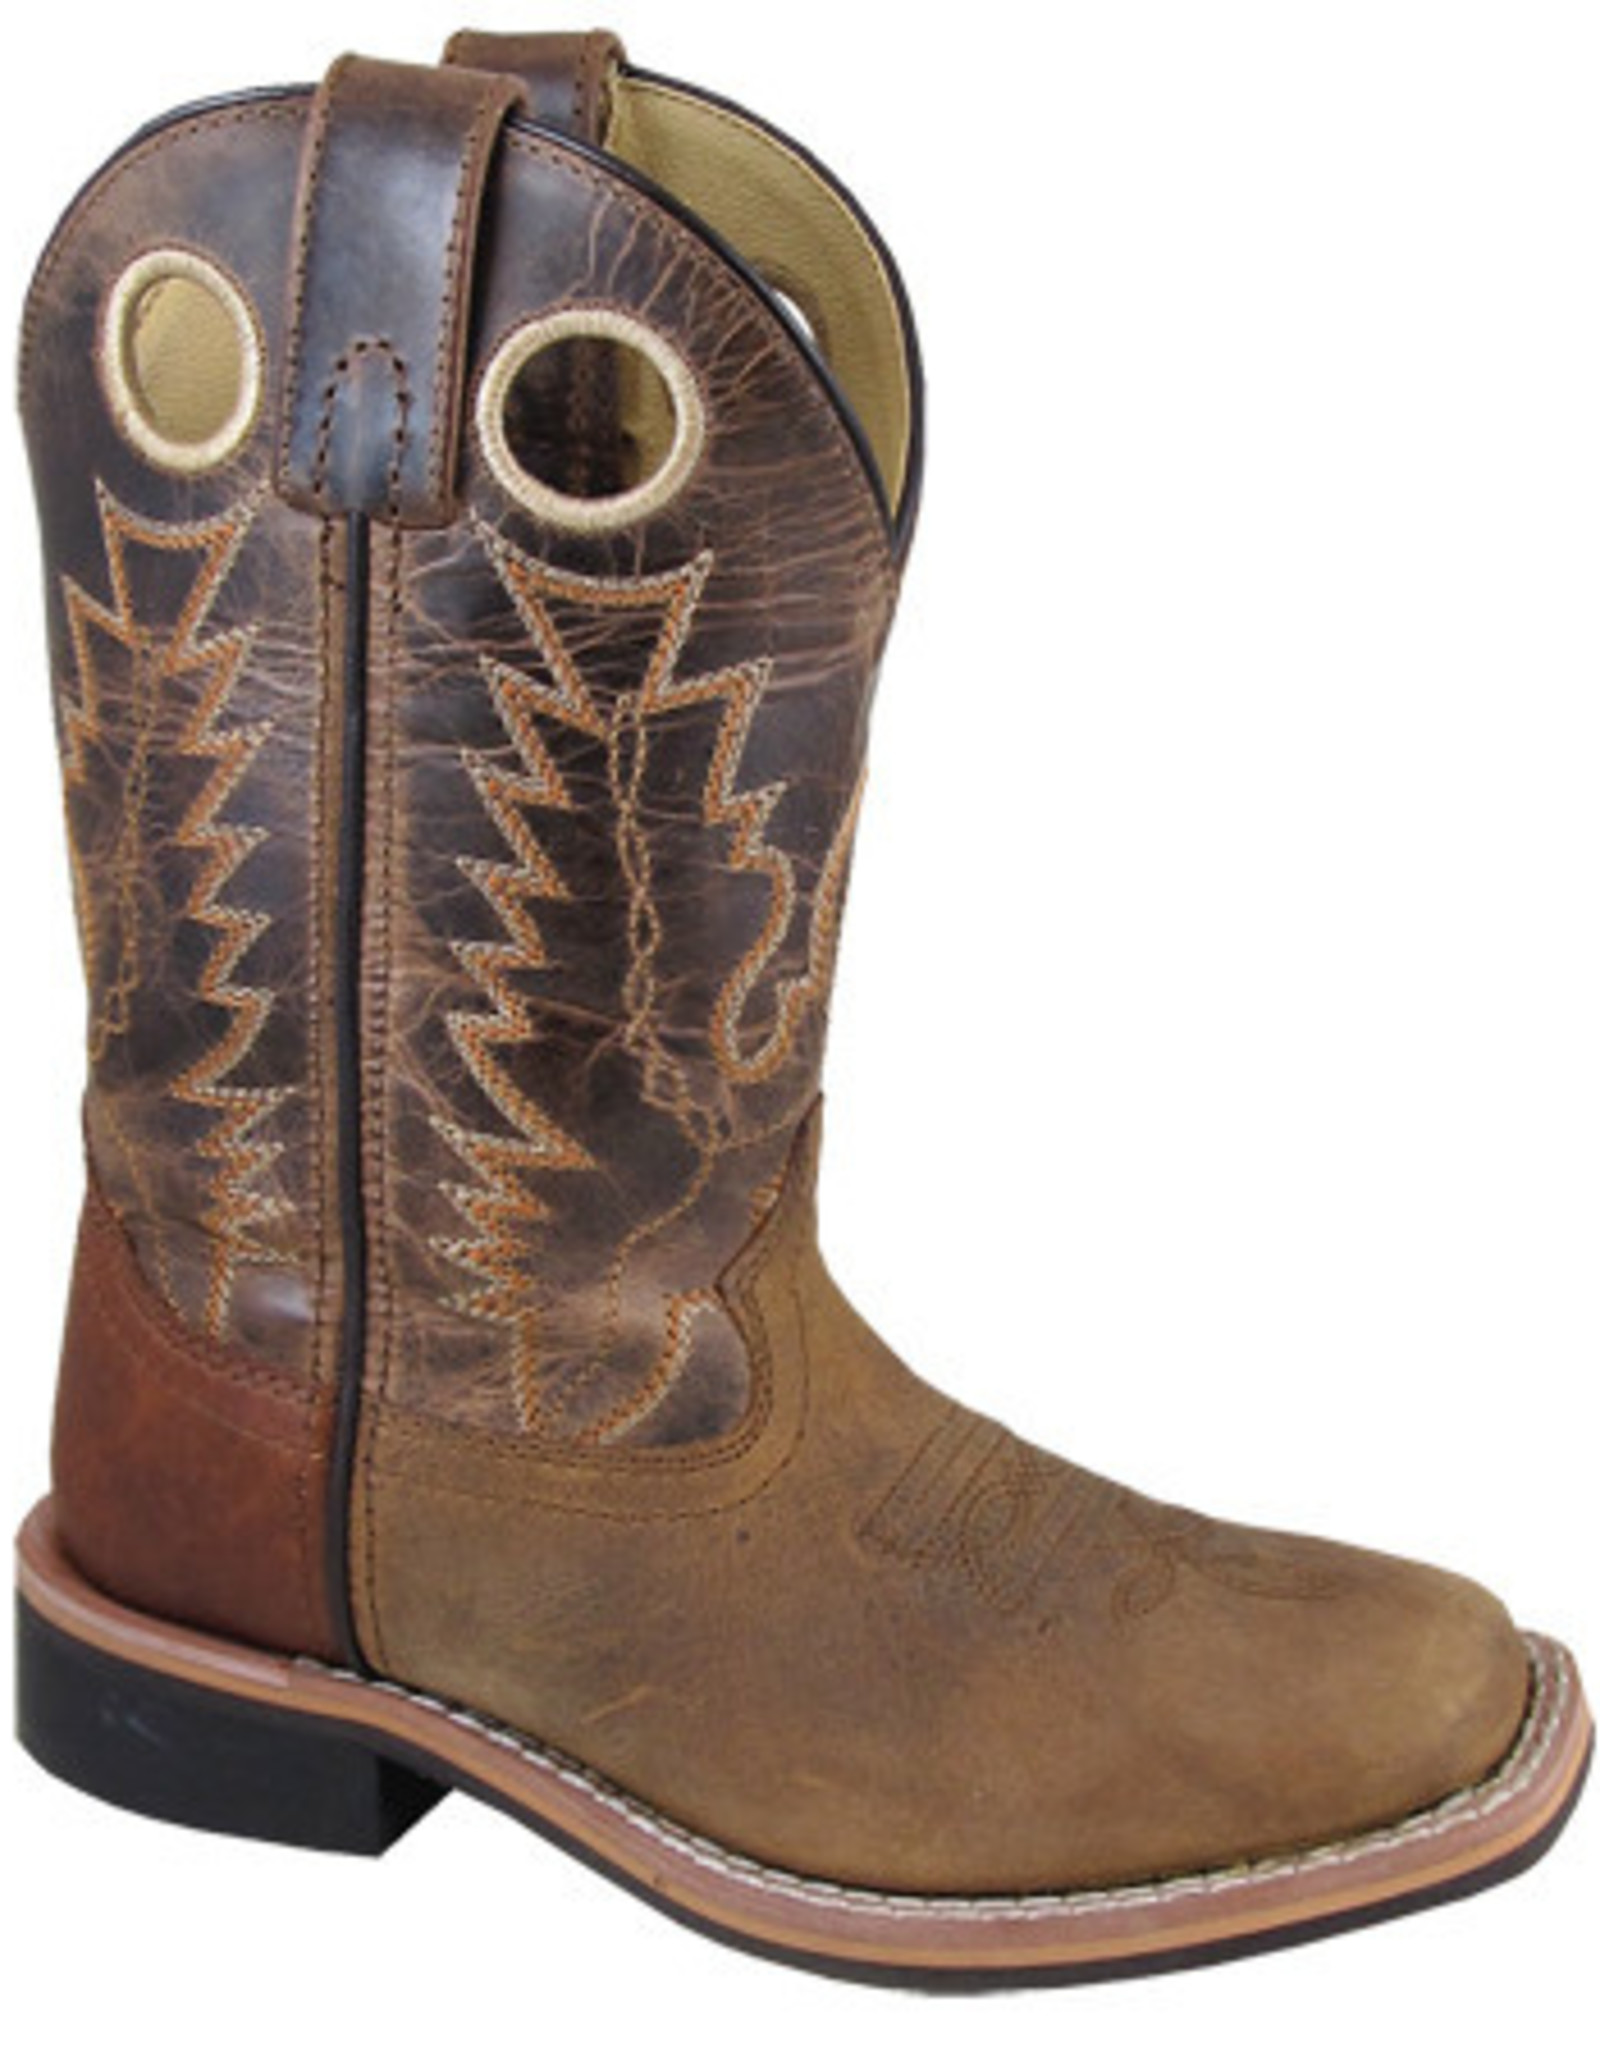 Jesse Childs and Ladies Western Boots - Smoky Mtn